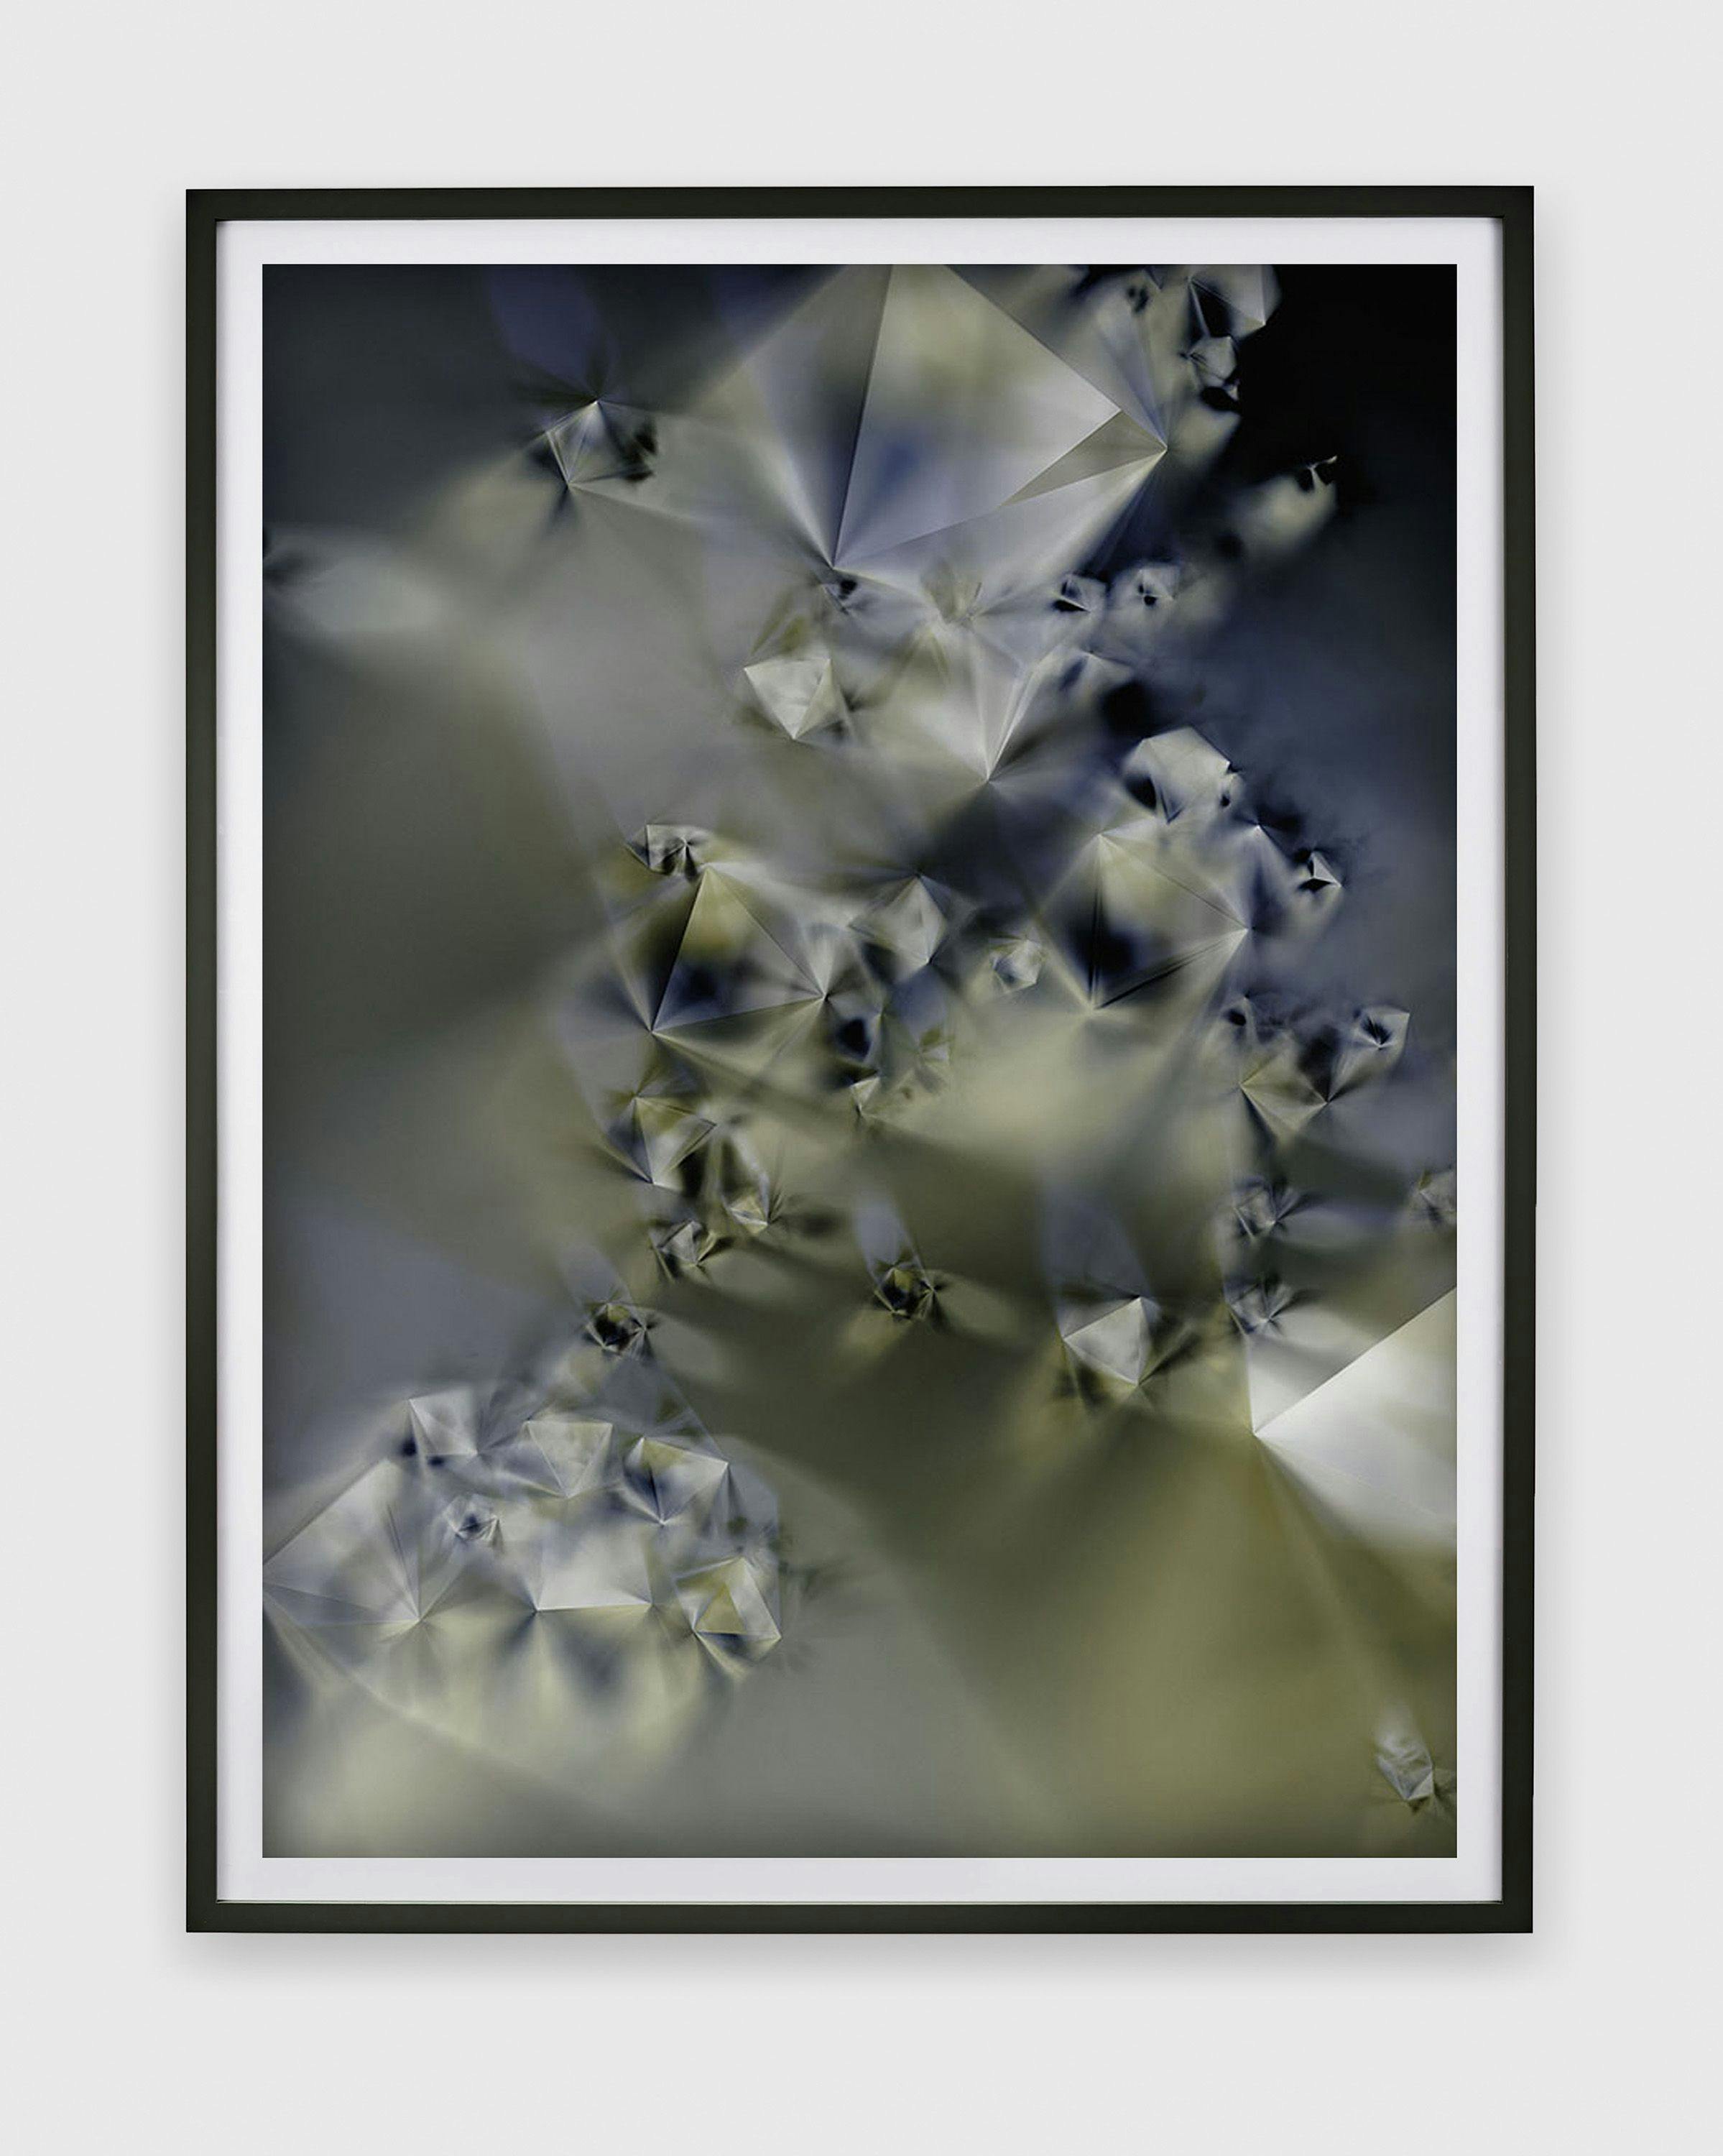 A photograph by Thomas Ruff, titled phg.04_I, dated 2013.